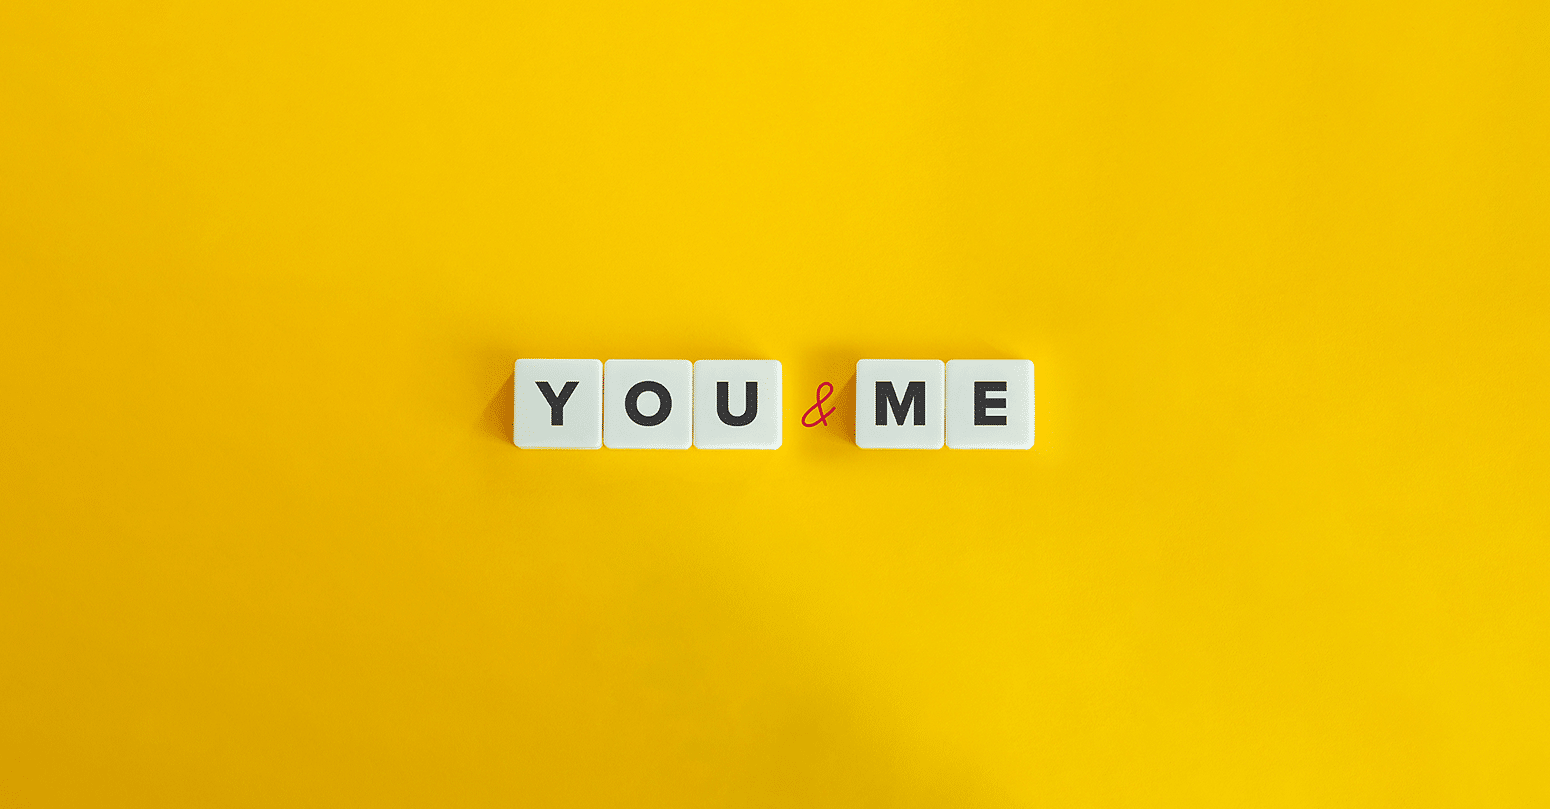 The words "you" and "me" in a yellow background.